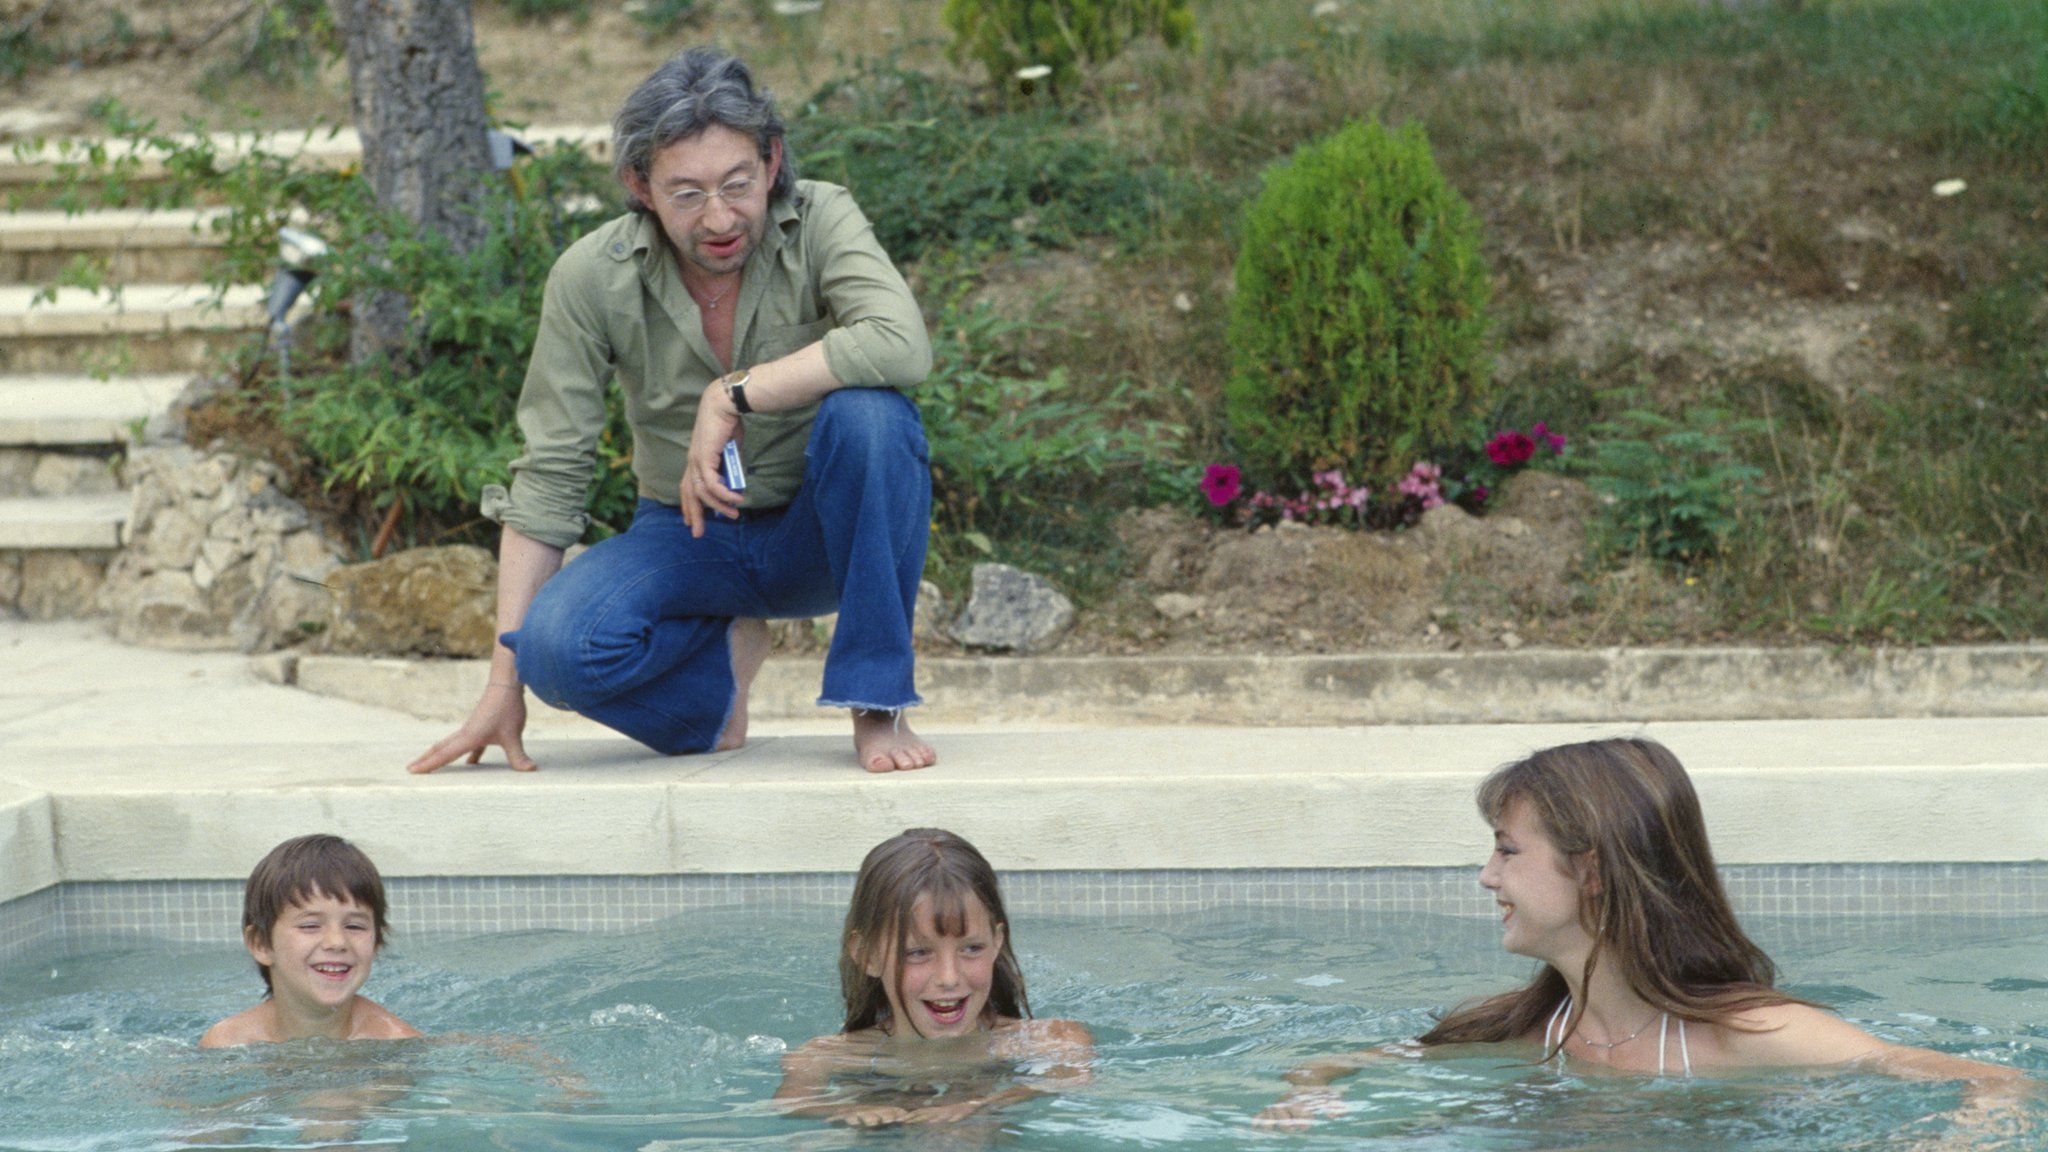 Jane Birkin on holiday in Saint-Tropez with her daughter Kate Barry, Sergei Gainsbourg and their baby daughter Charlotte in the 1970s